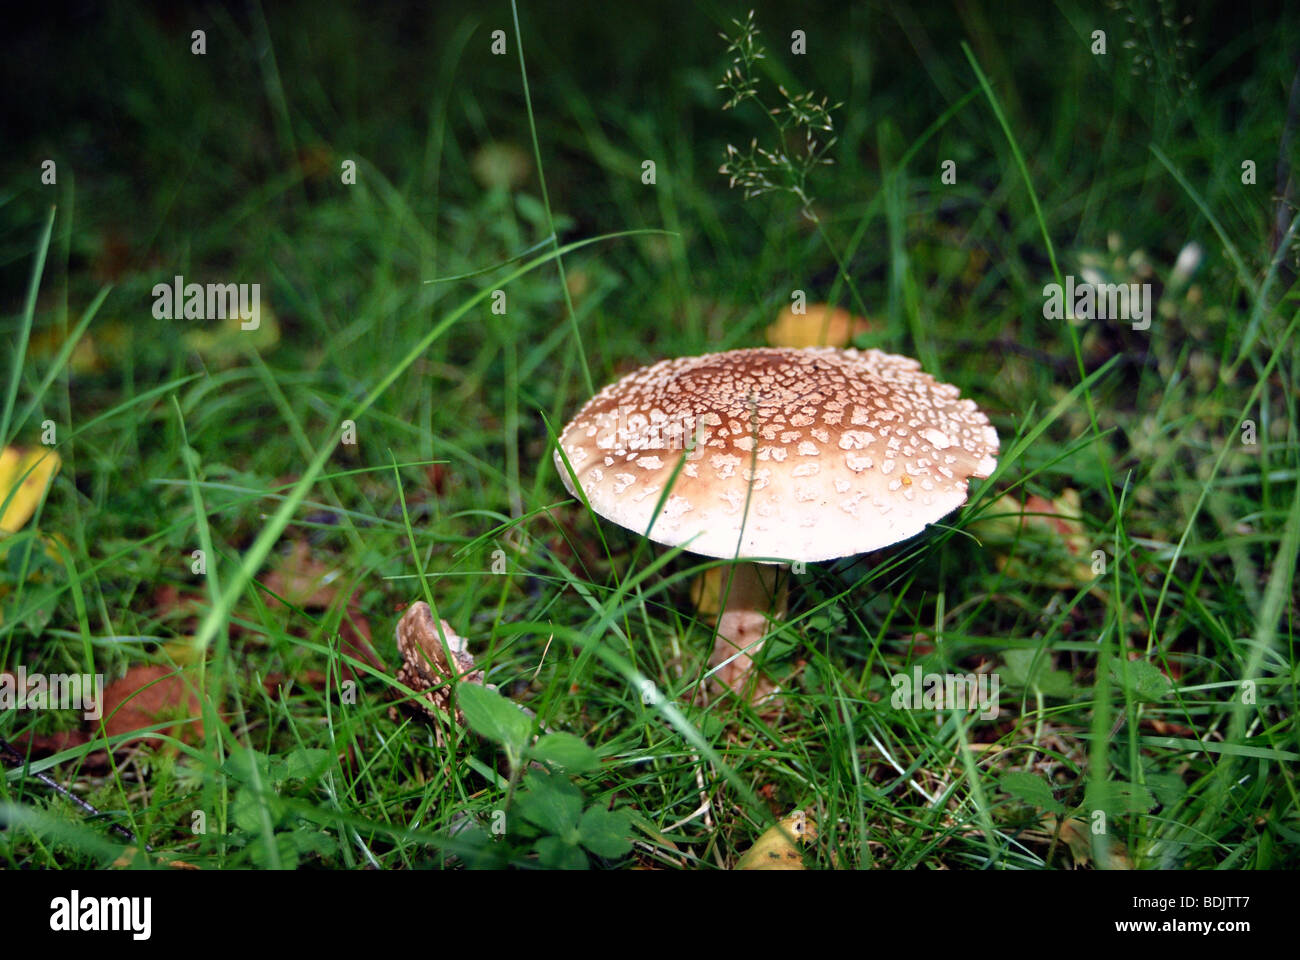 A Blusher mushroom growing in a field Stock Photo